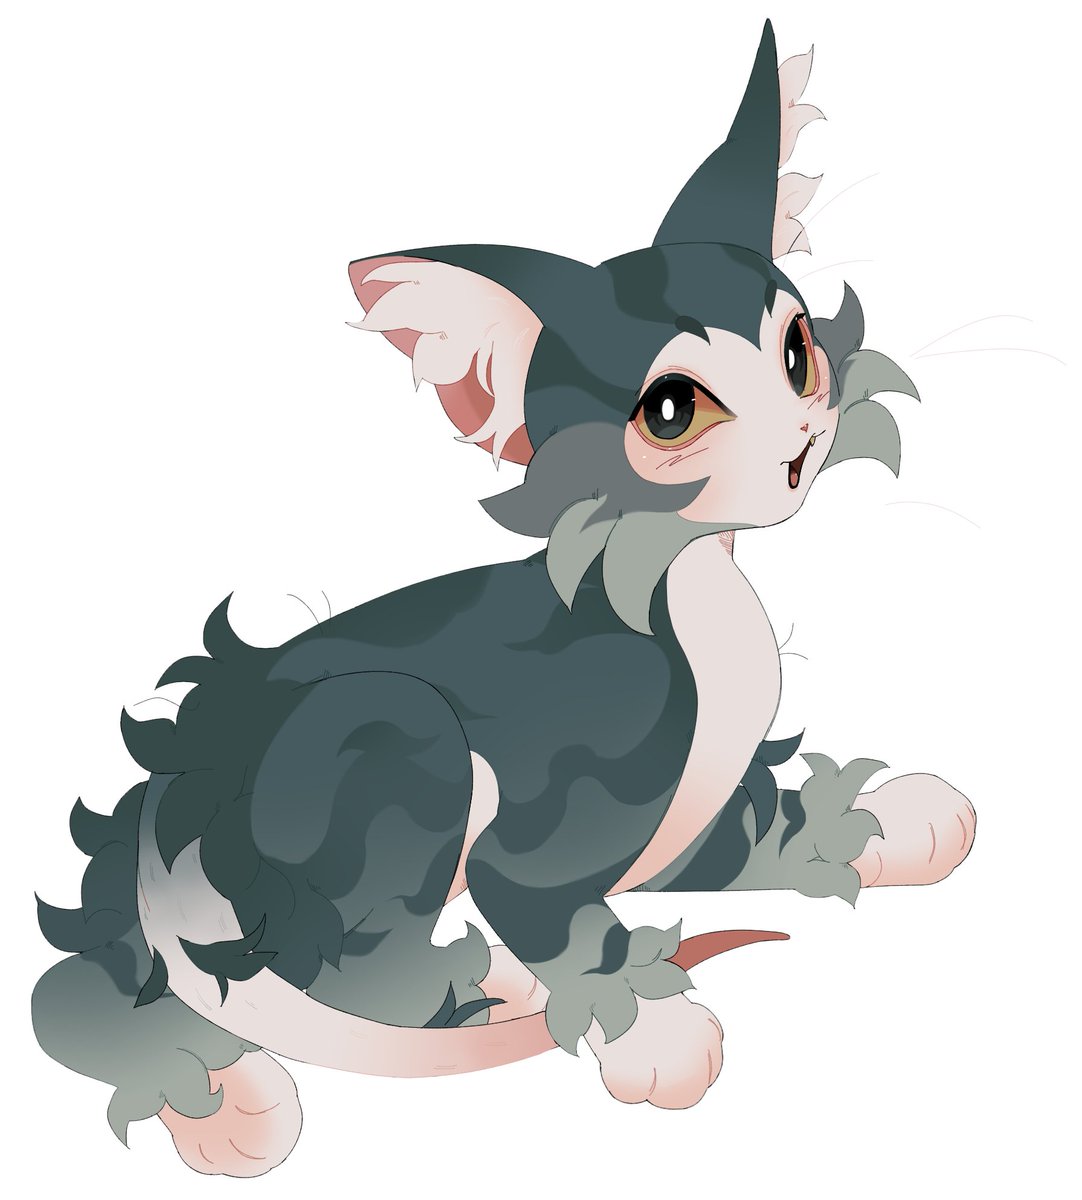 another chibi comm! had so much fun painting this lykoi kitty! #warriorcats #ArtistsOnTwitterCommunity